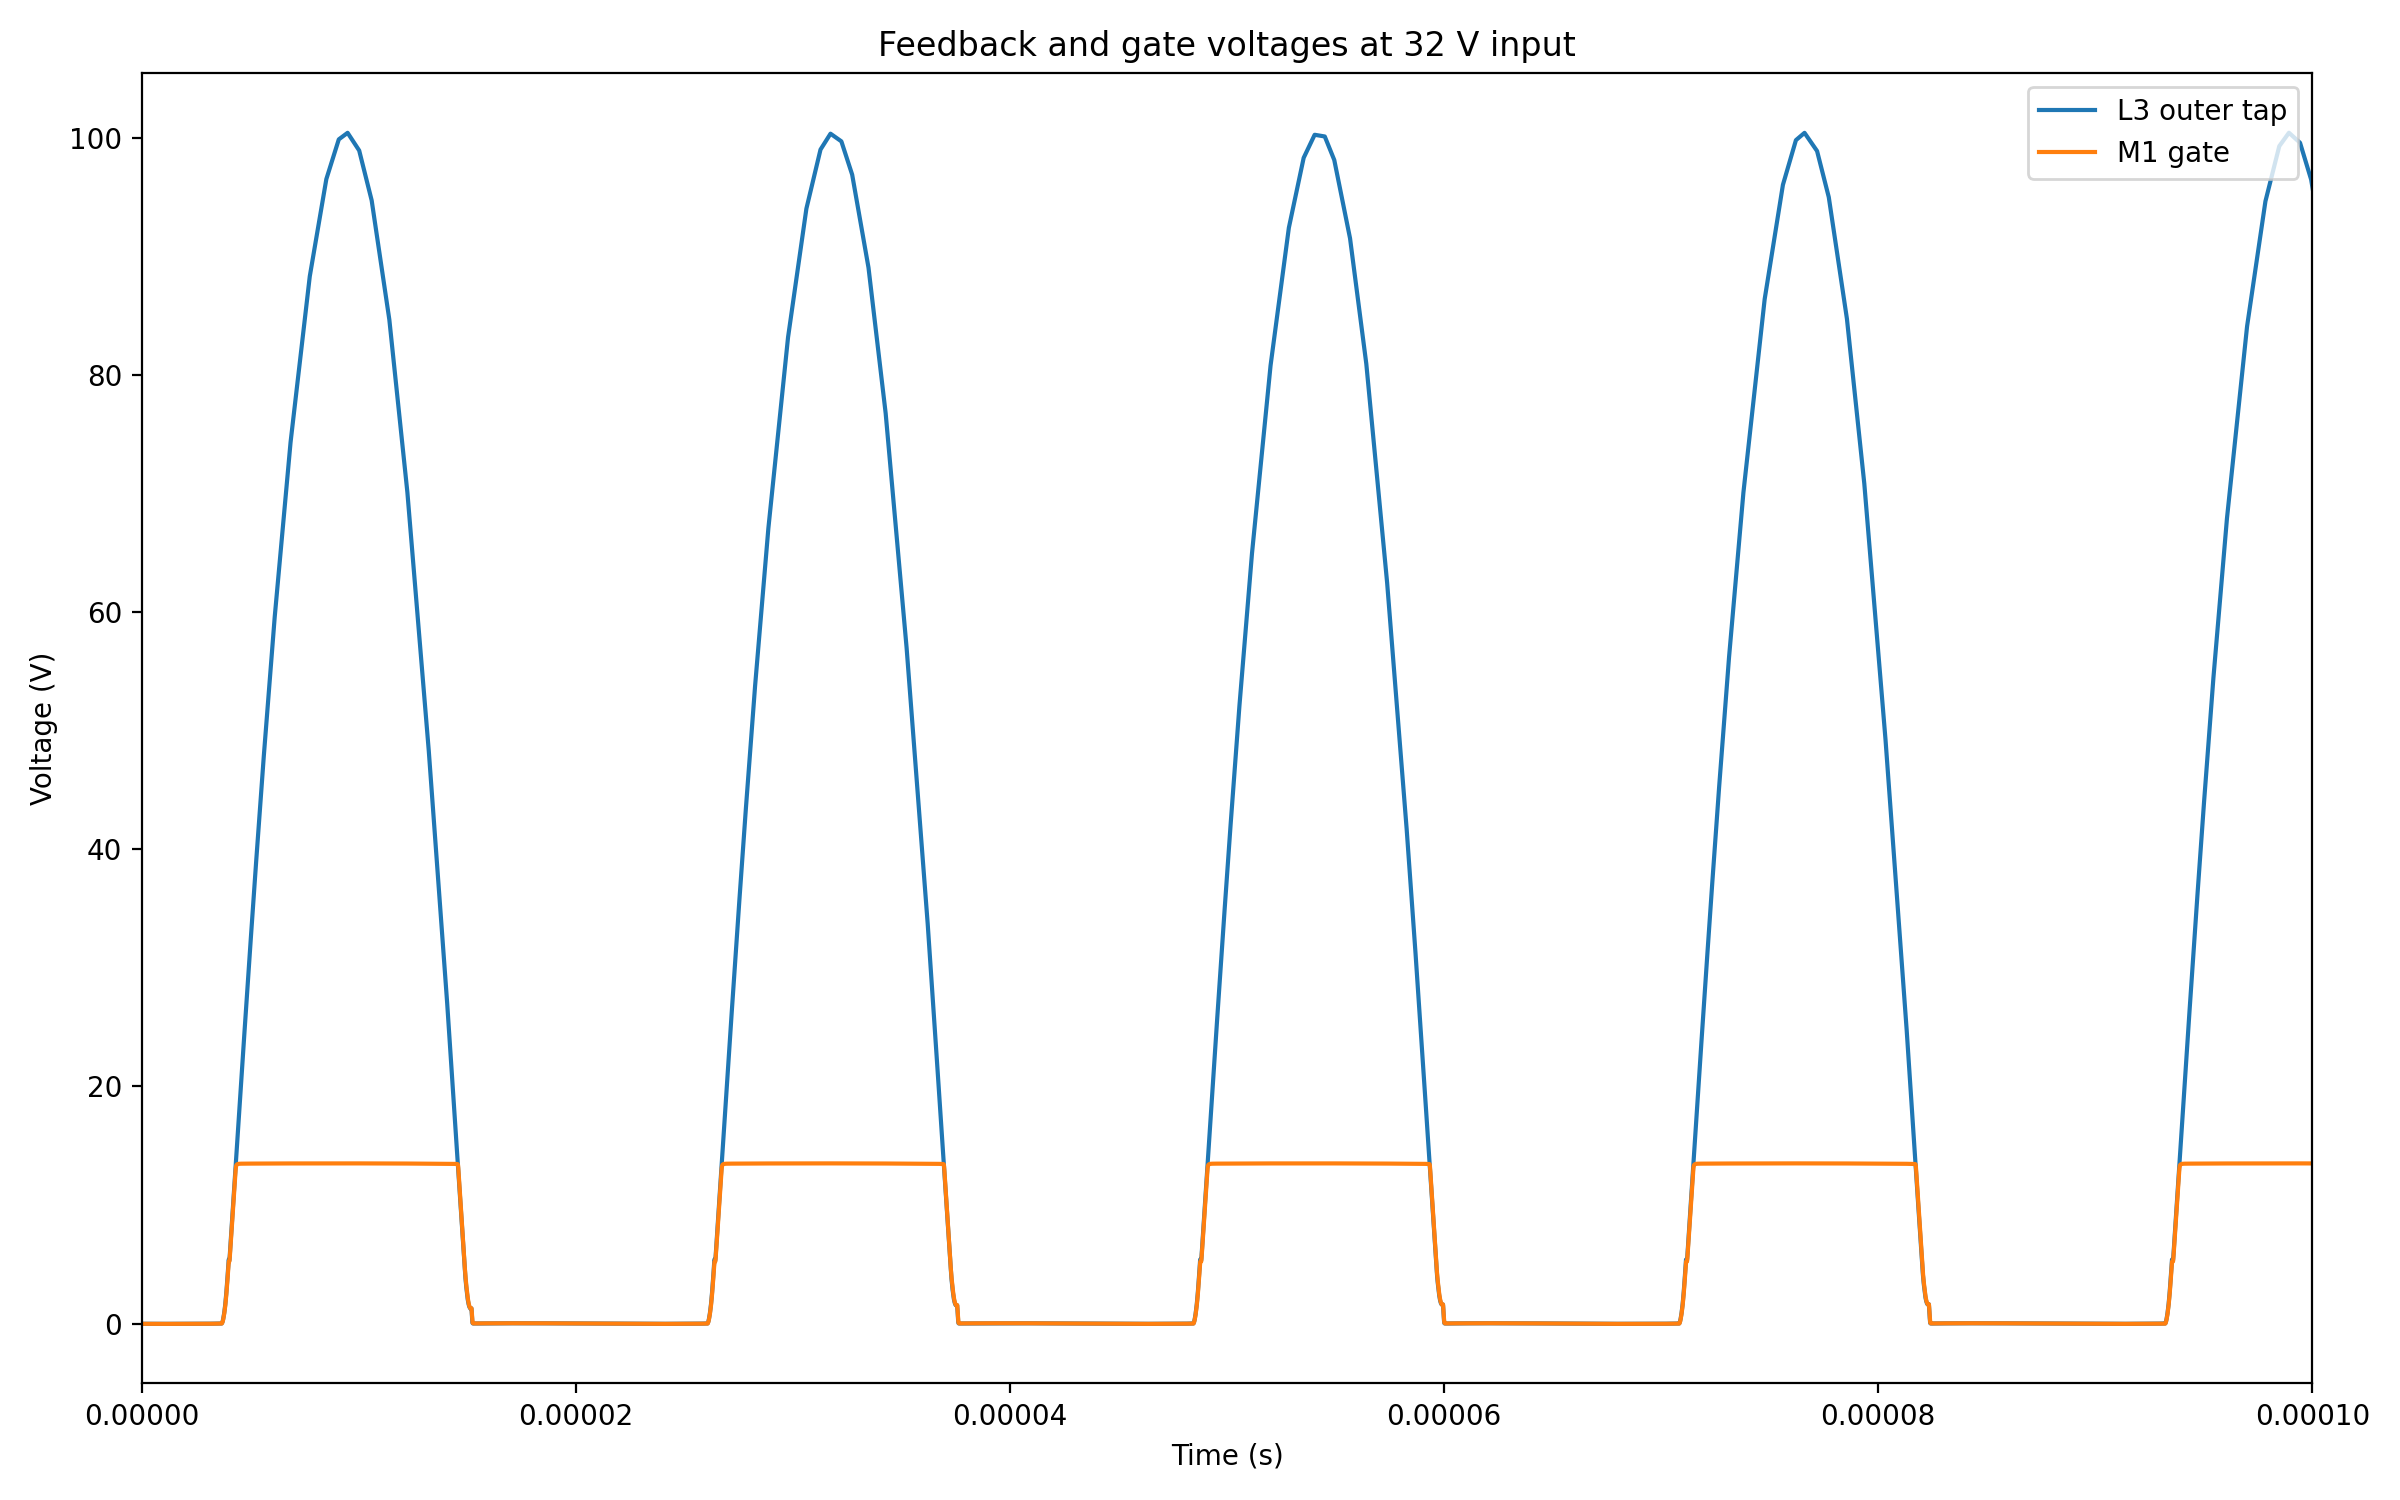 A plot of a half sine signal (L3 outer tap) in blue and a clipped version of the same (M1 gate) in orange.